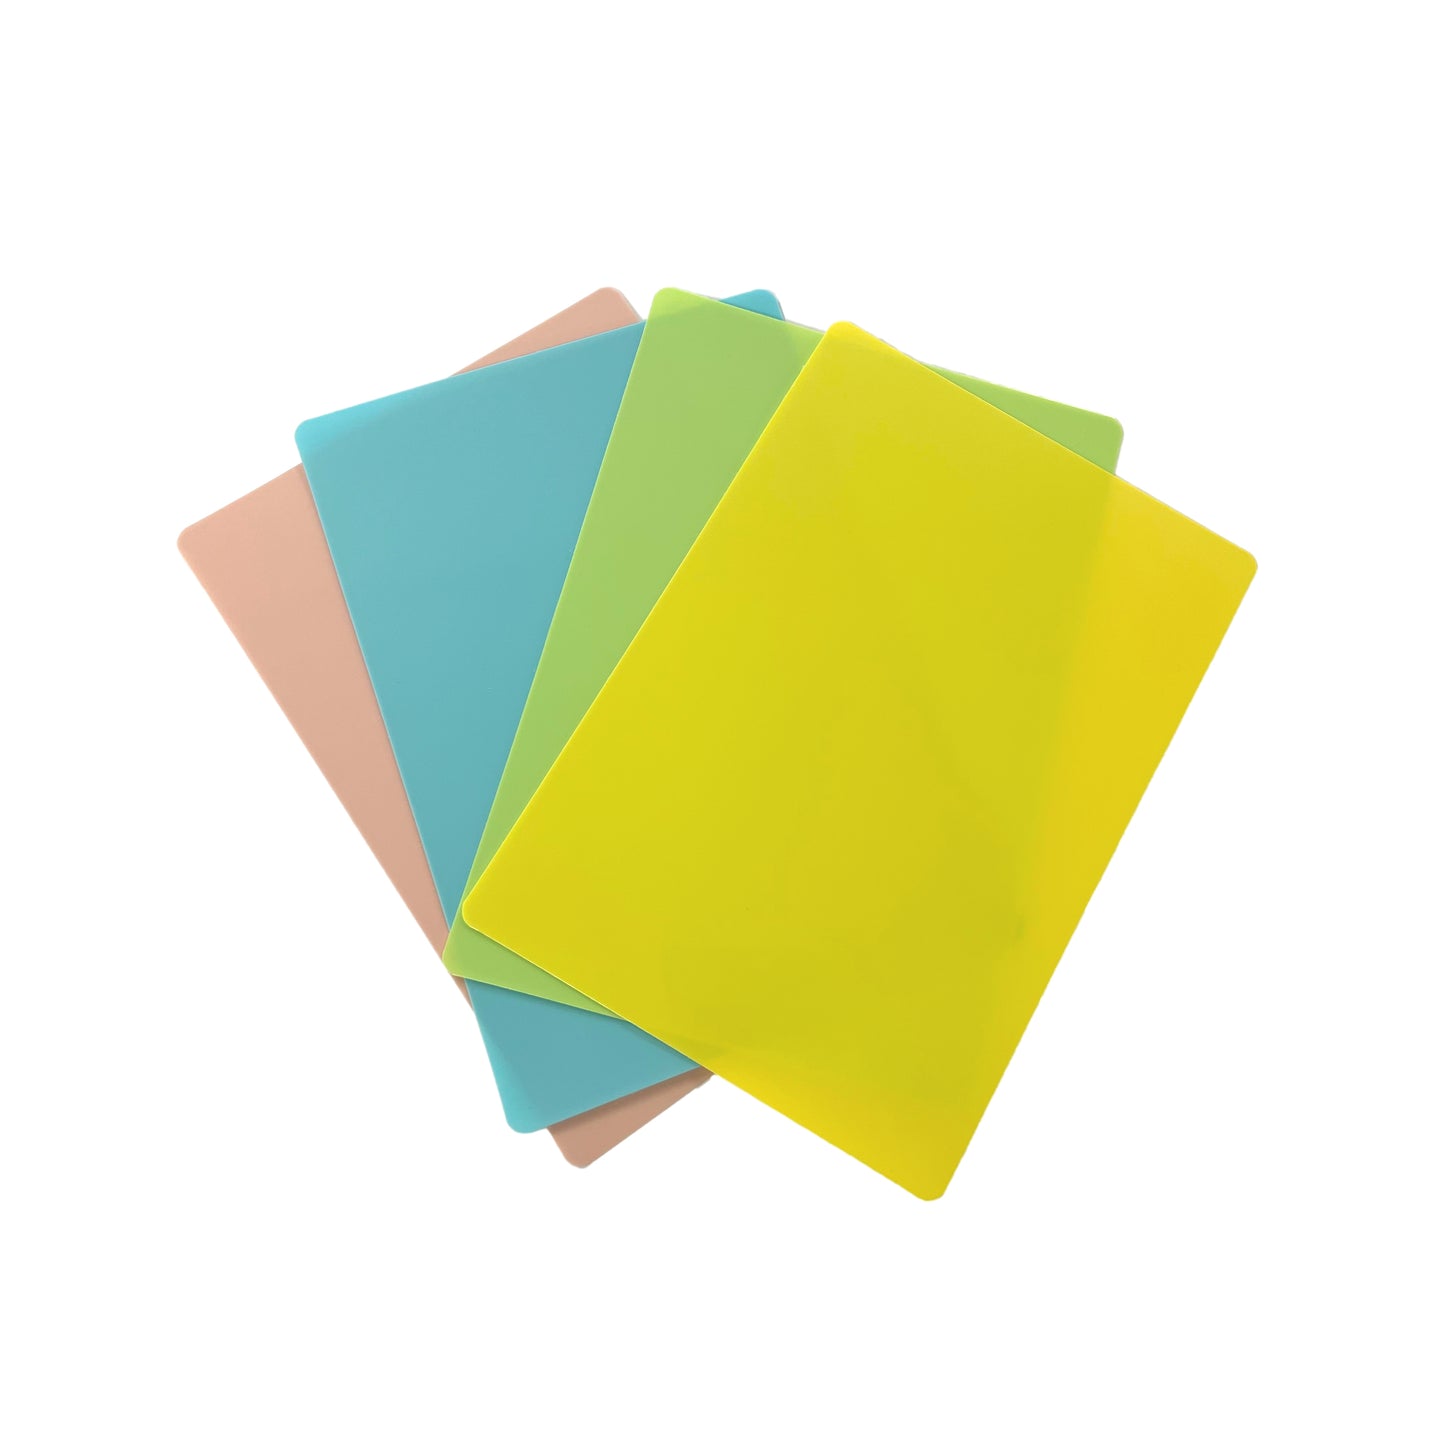 Pack of 12 Yellow Coloured A3 Whiteboards